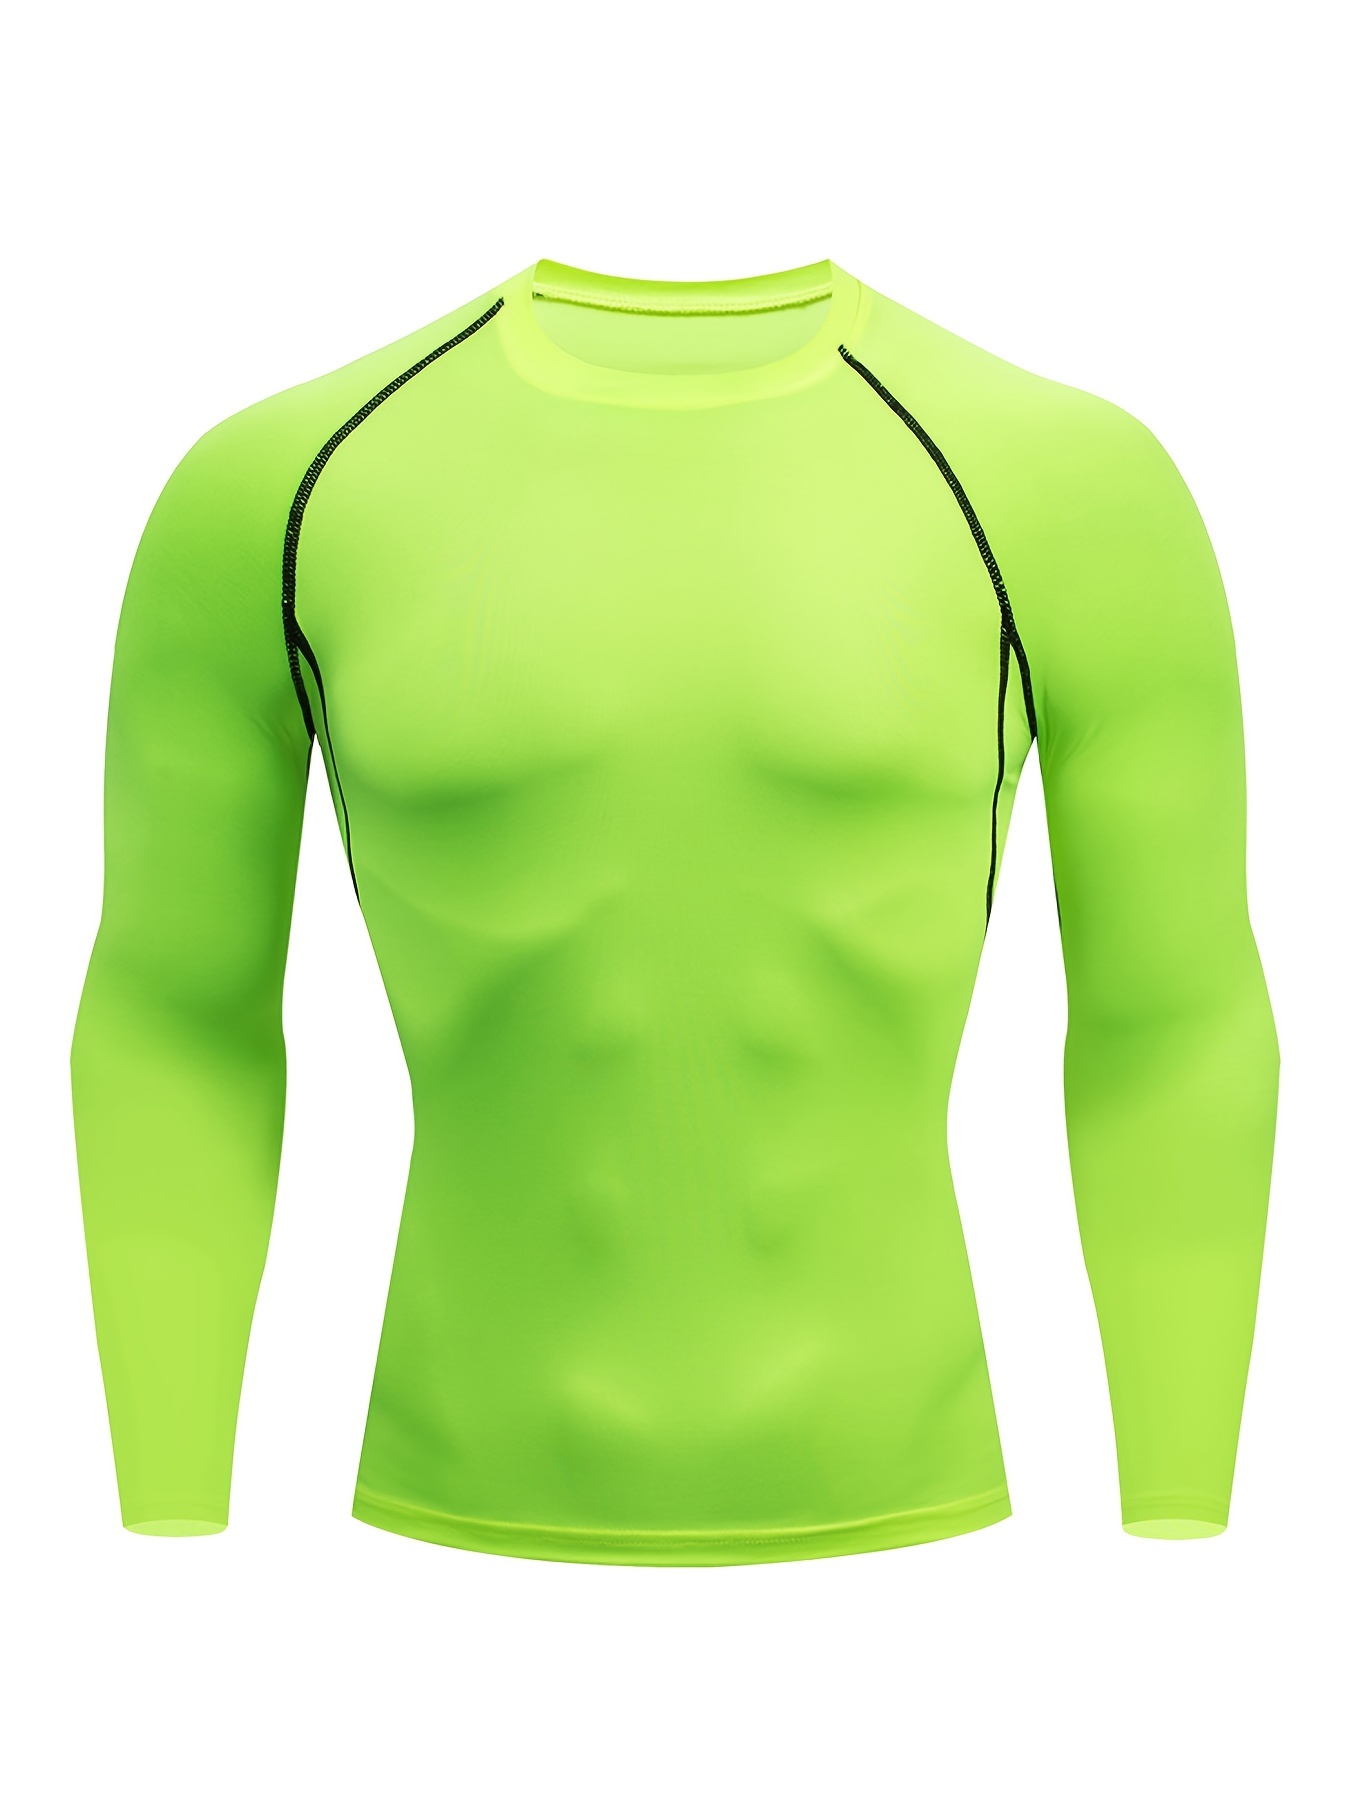 Quick dry Men's Compression Shirt Fluorescent Green Athletic